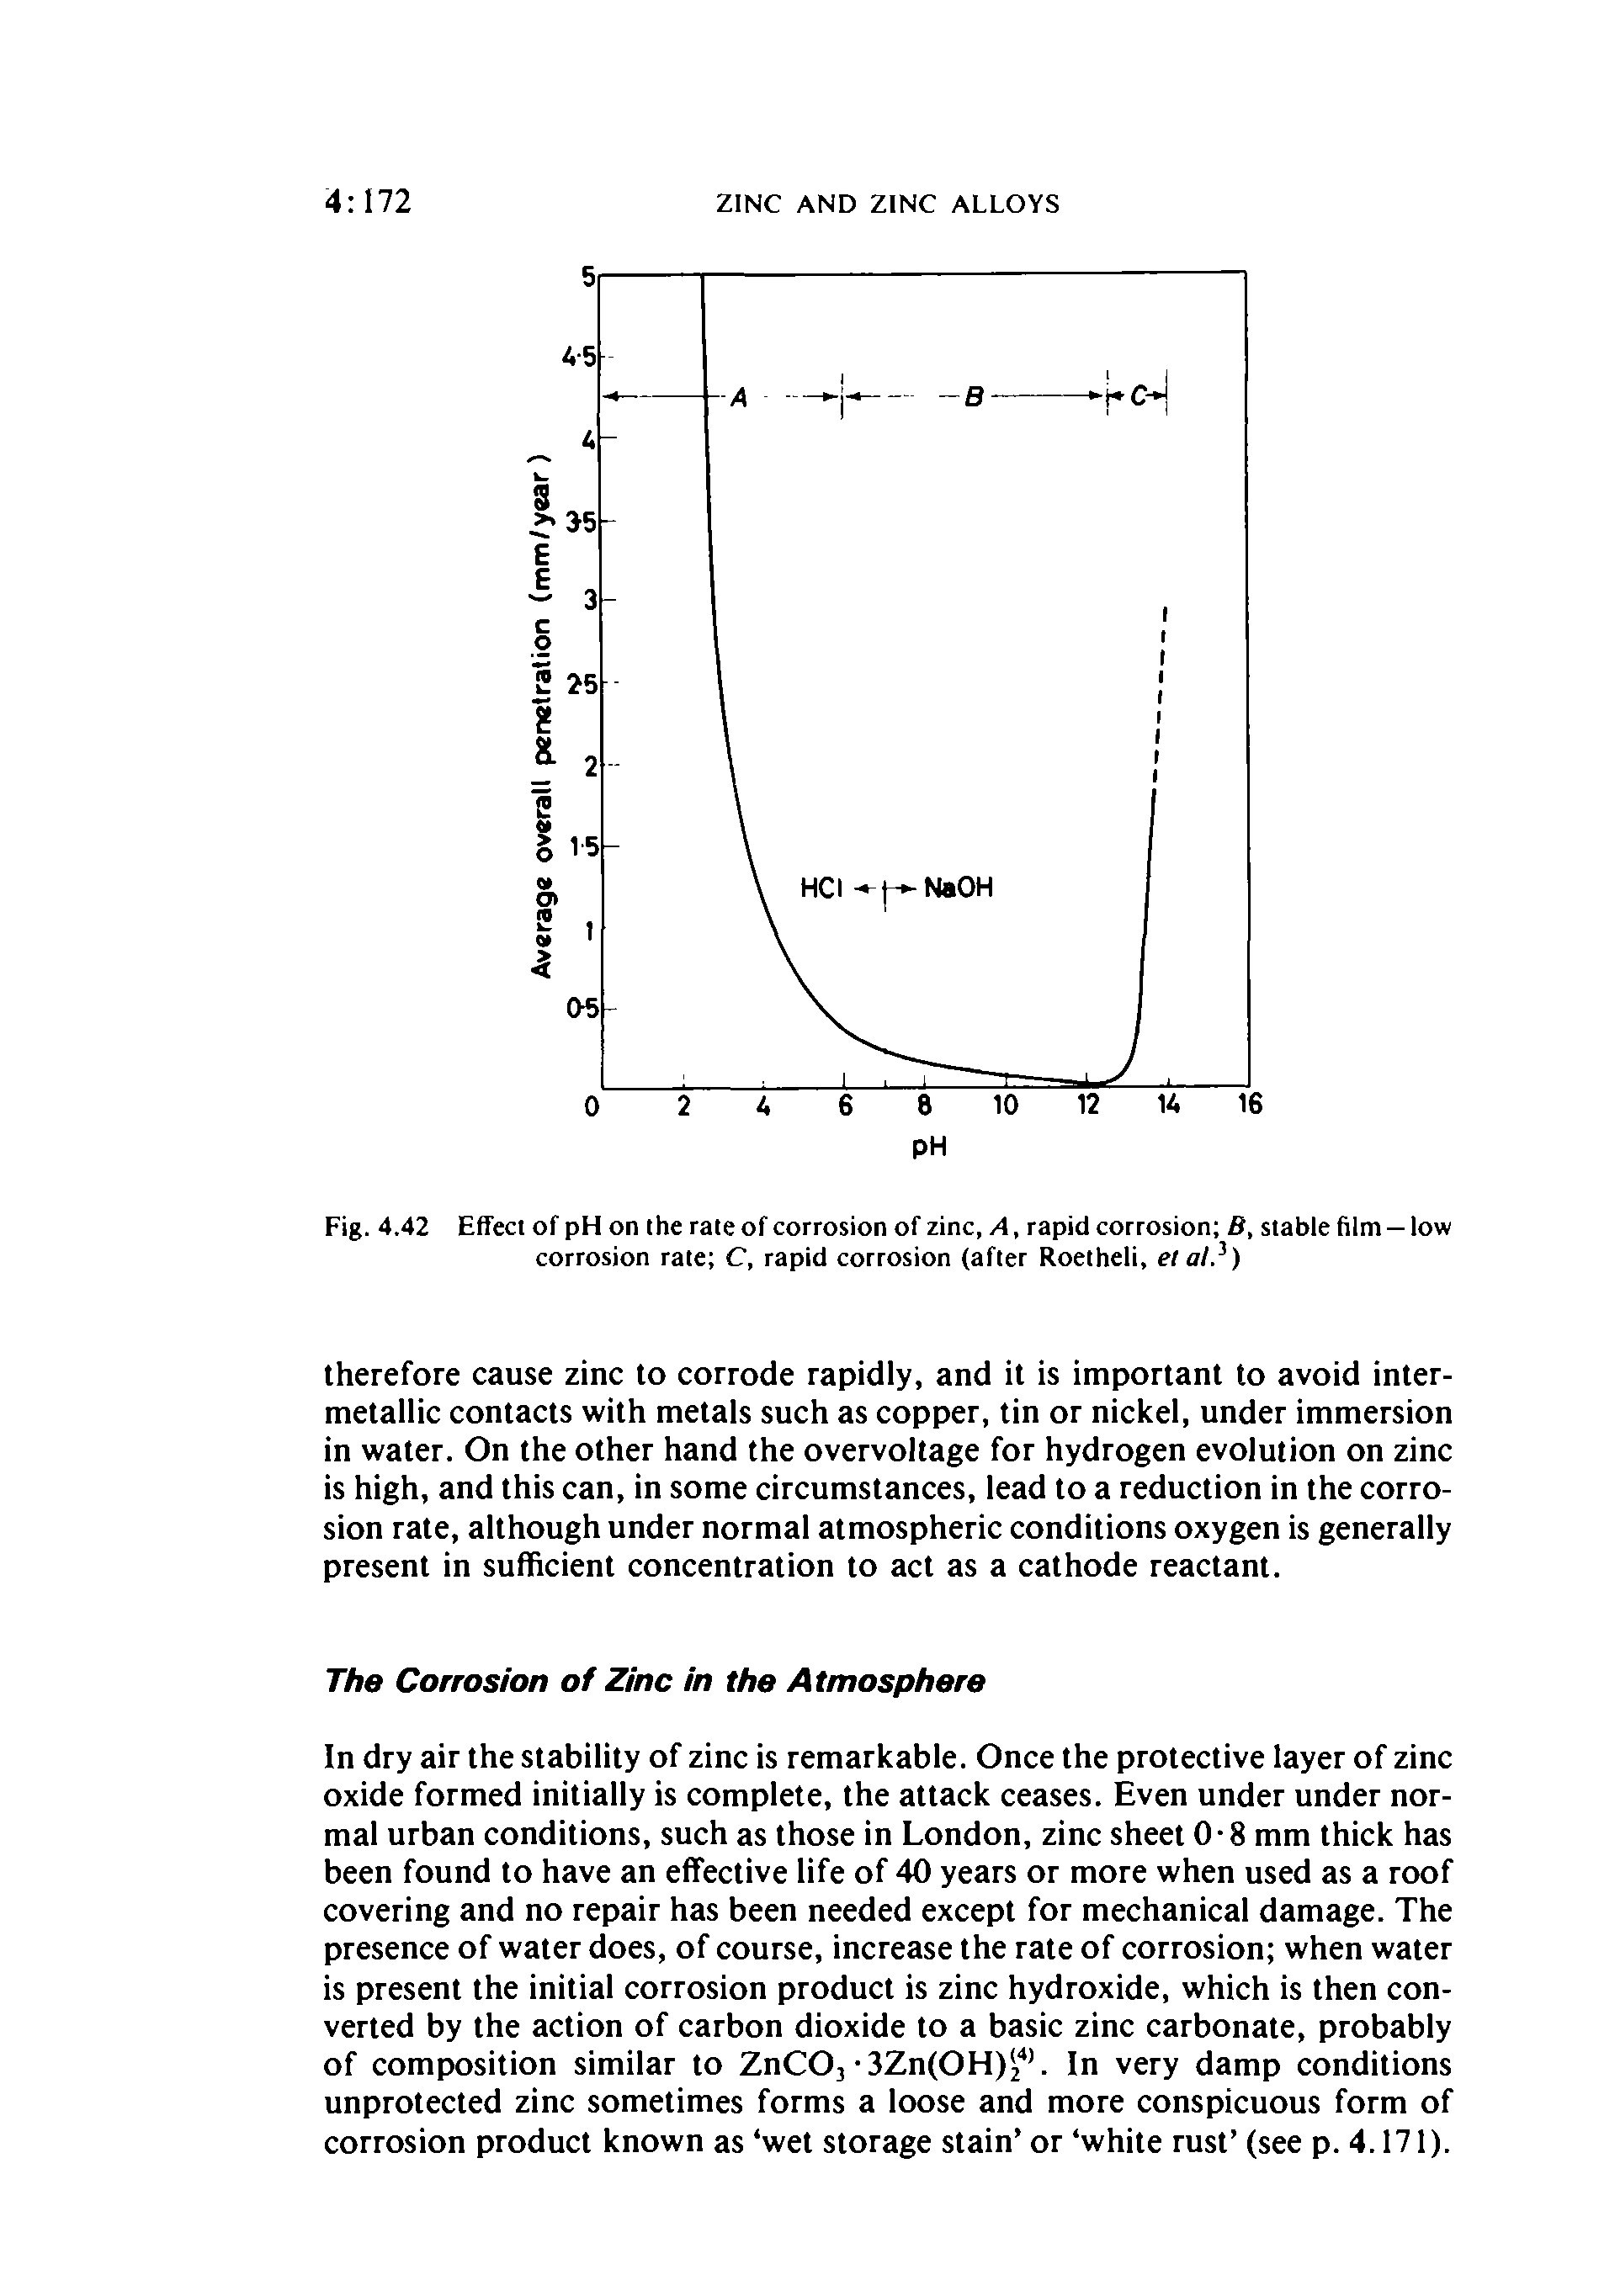 Fig. 4.42 Effect of pH on the rate of corrosion of zinc, A, rapid corrosion B, stable film — low corrosion rate C, rapid corrosion (after Roetheli, elal )...